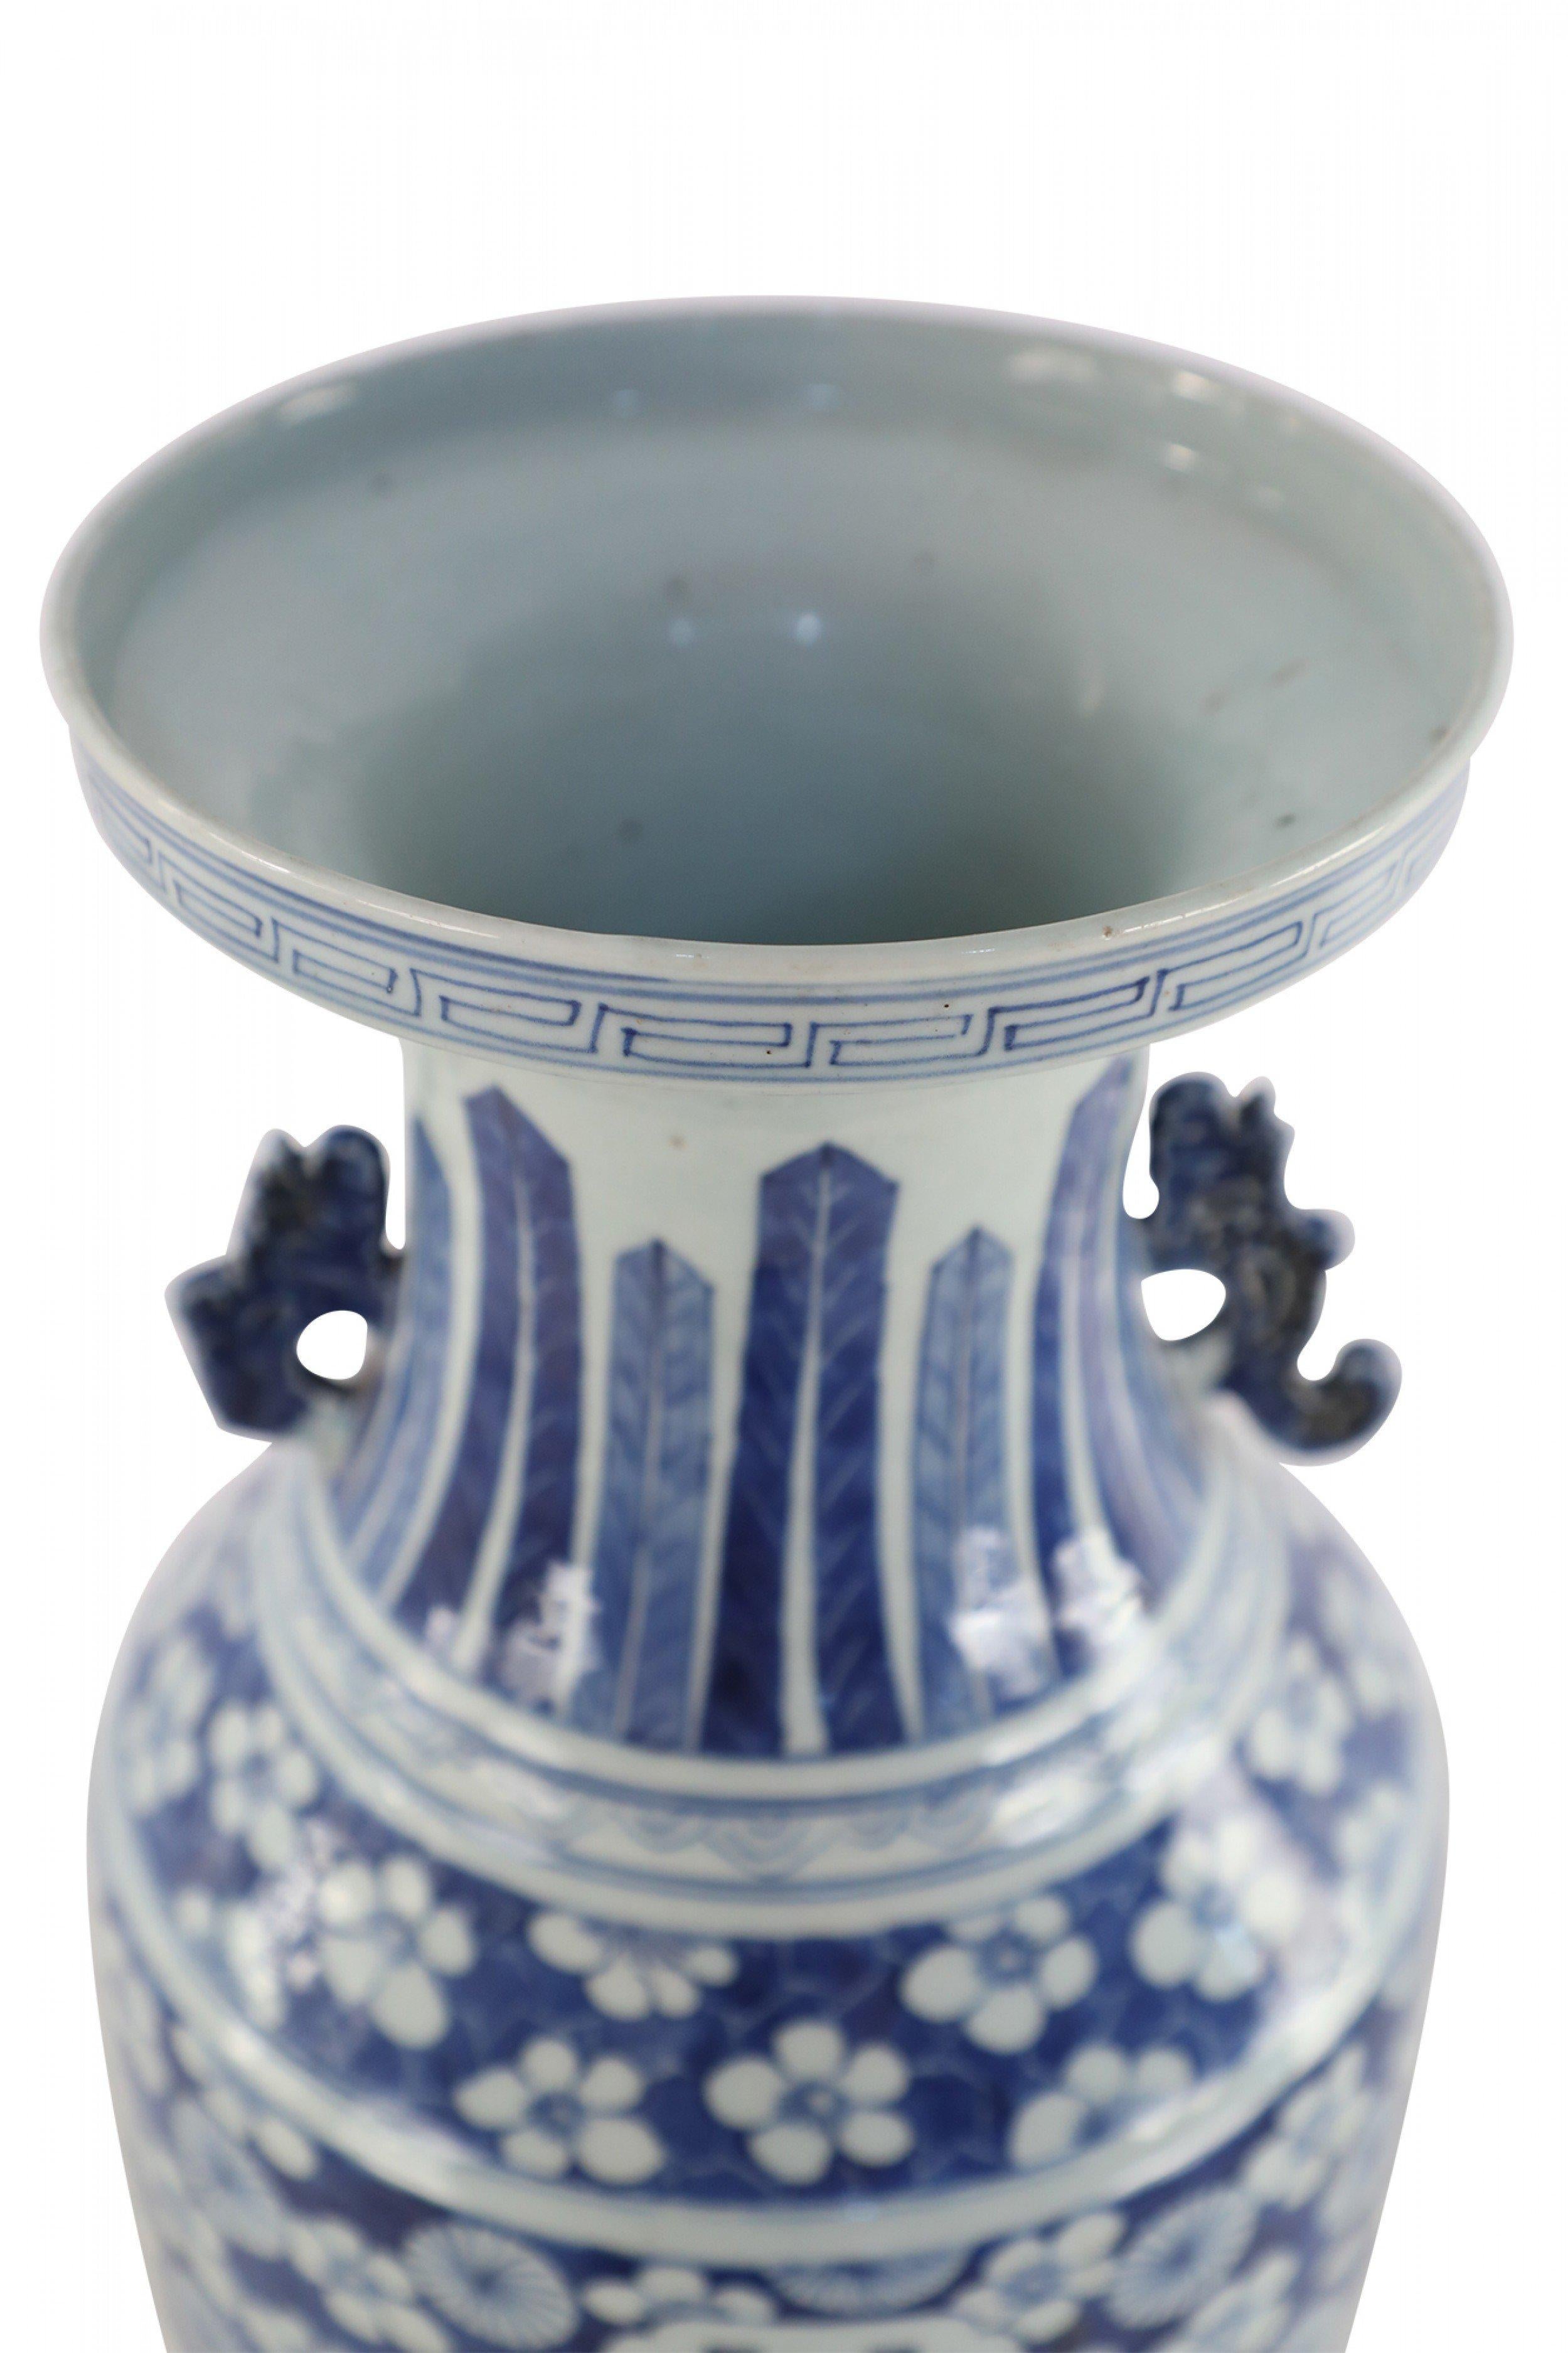 Chinese White and Blue Floral and Character Design Porcelain Urn For Sale 1